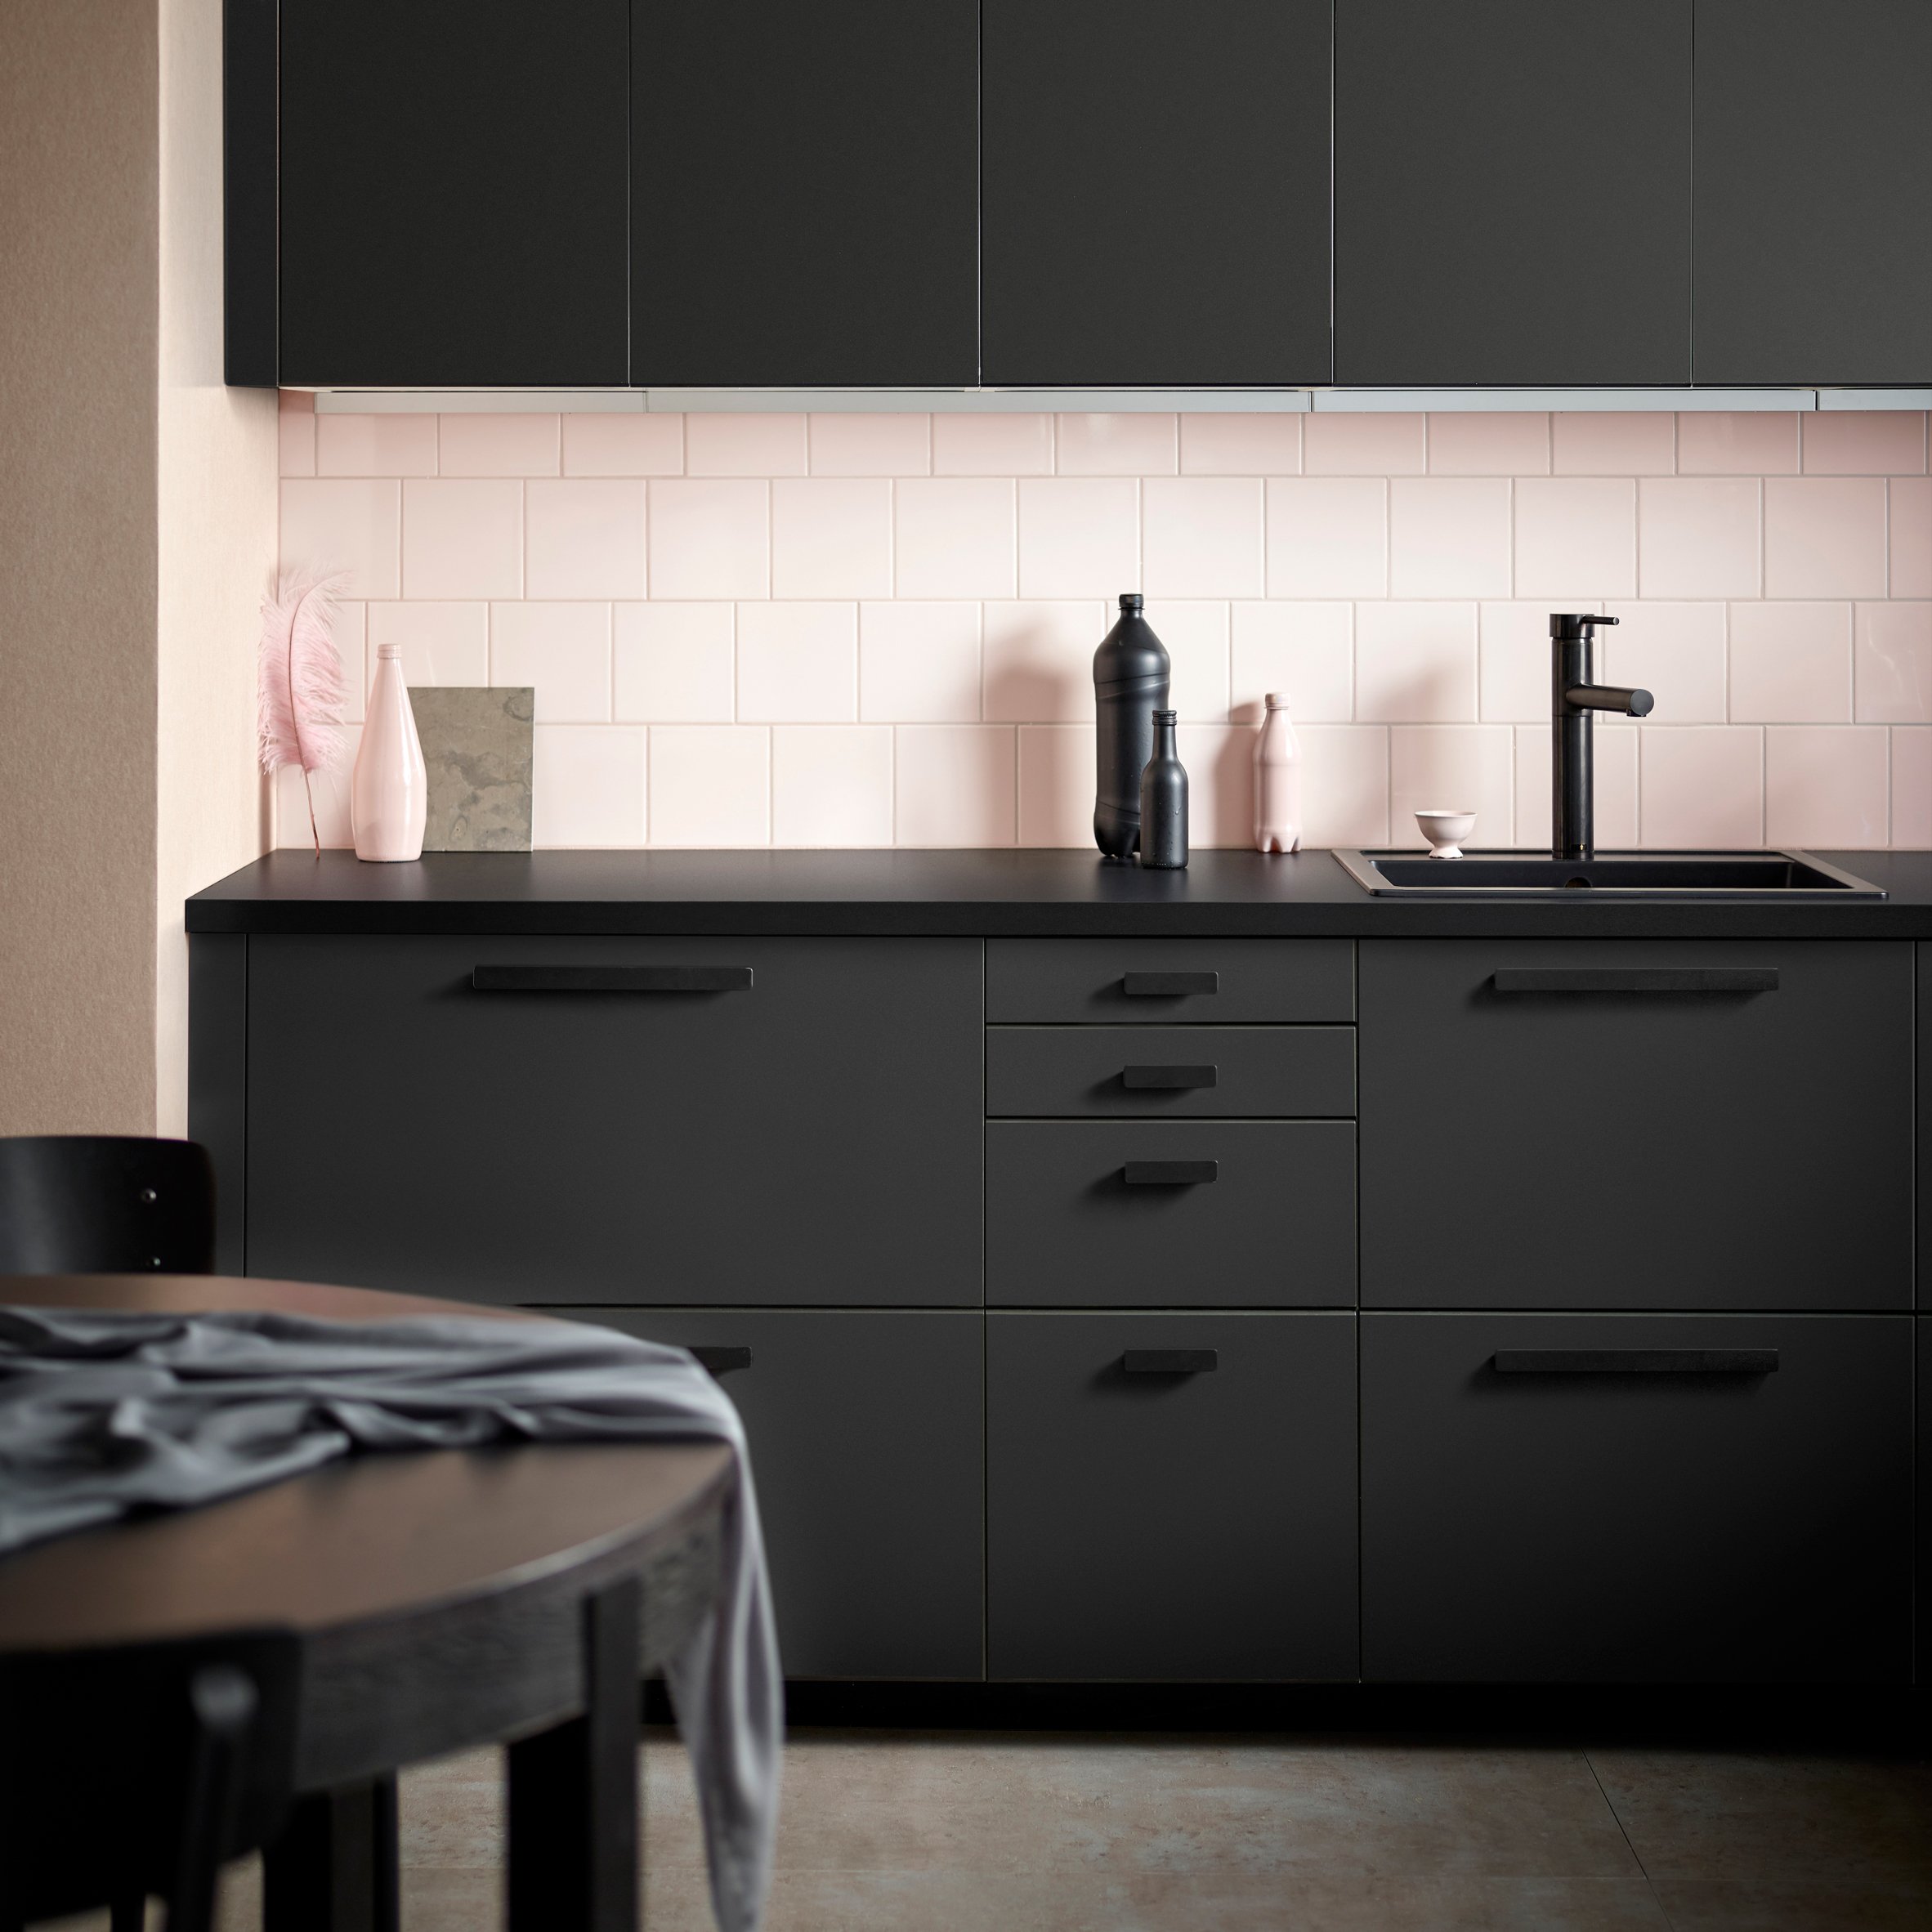 form us with love creates ikea kitchen from recycled plastic